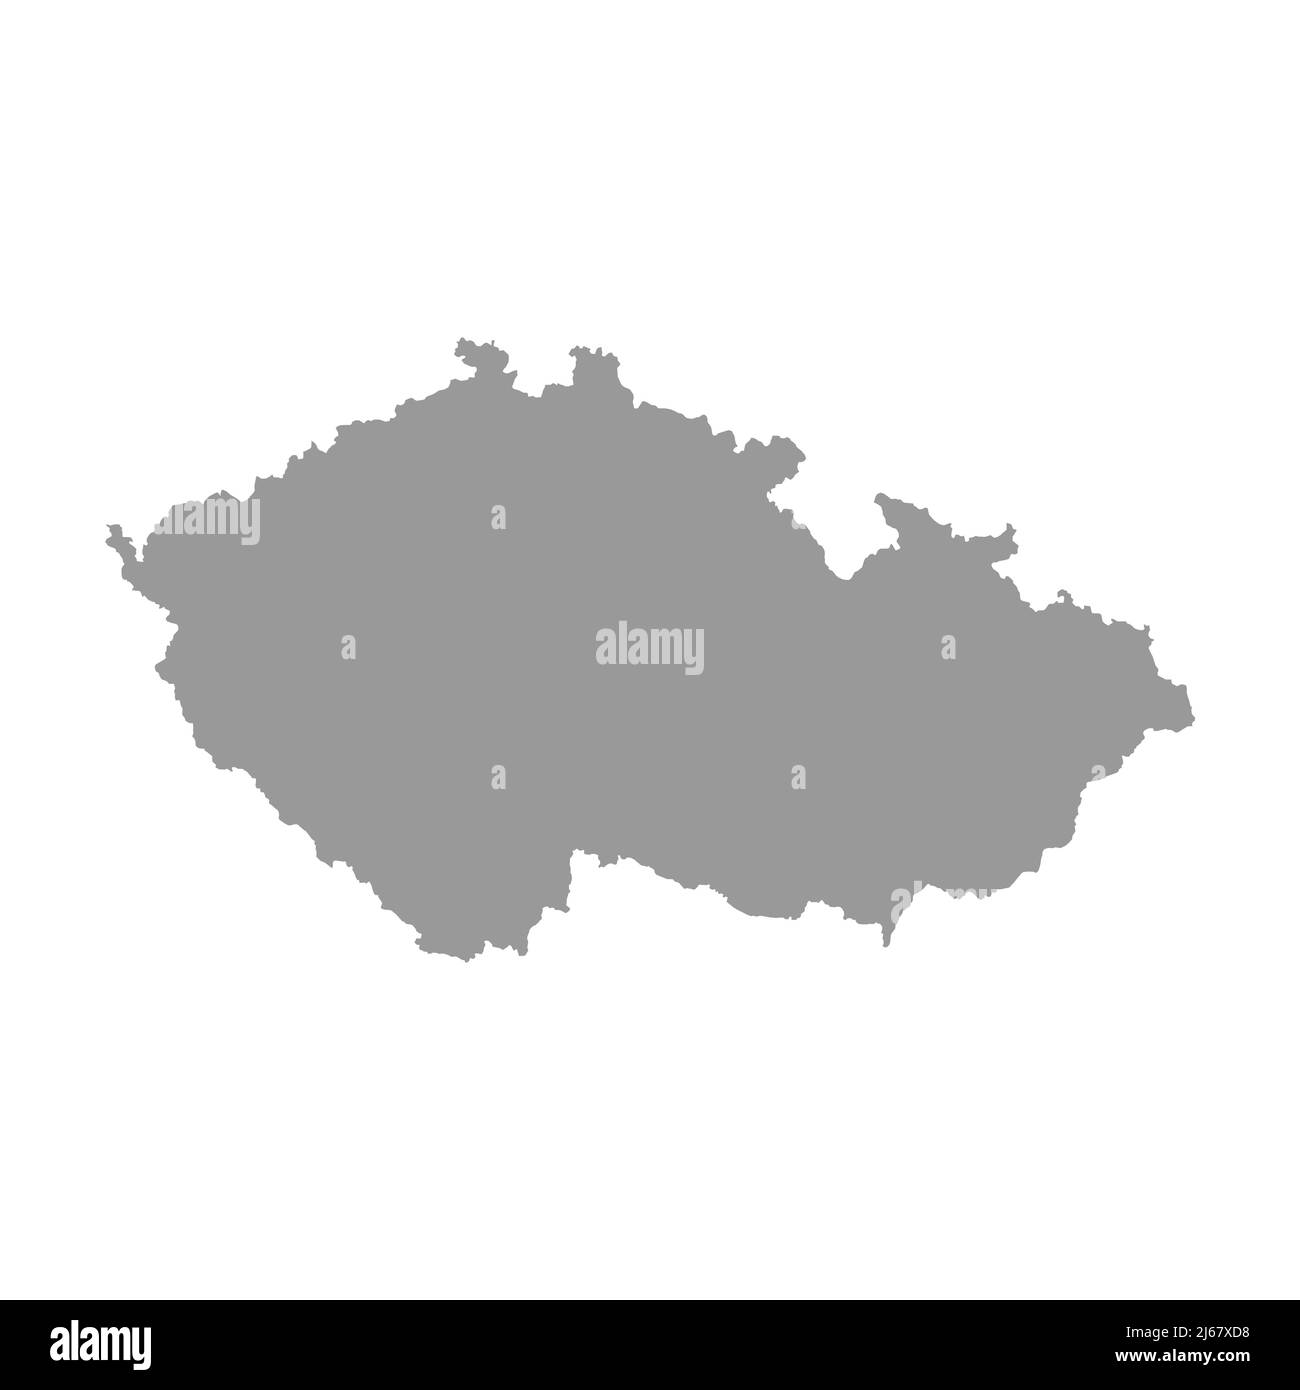 The map of the Czech Republic on white background Stock Vector